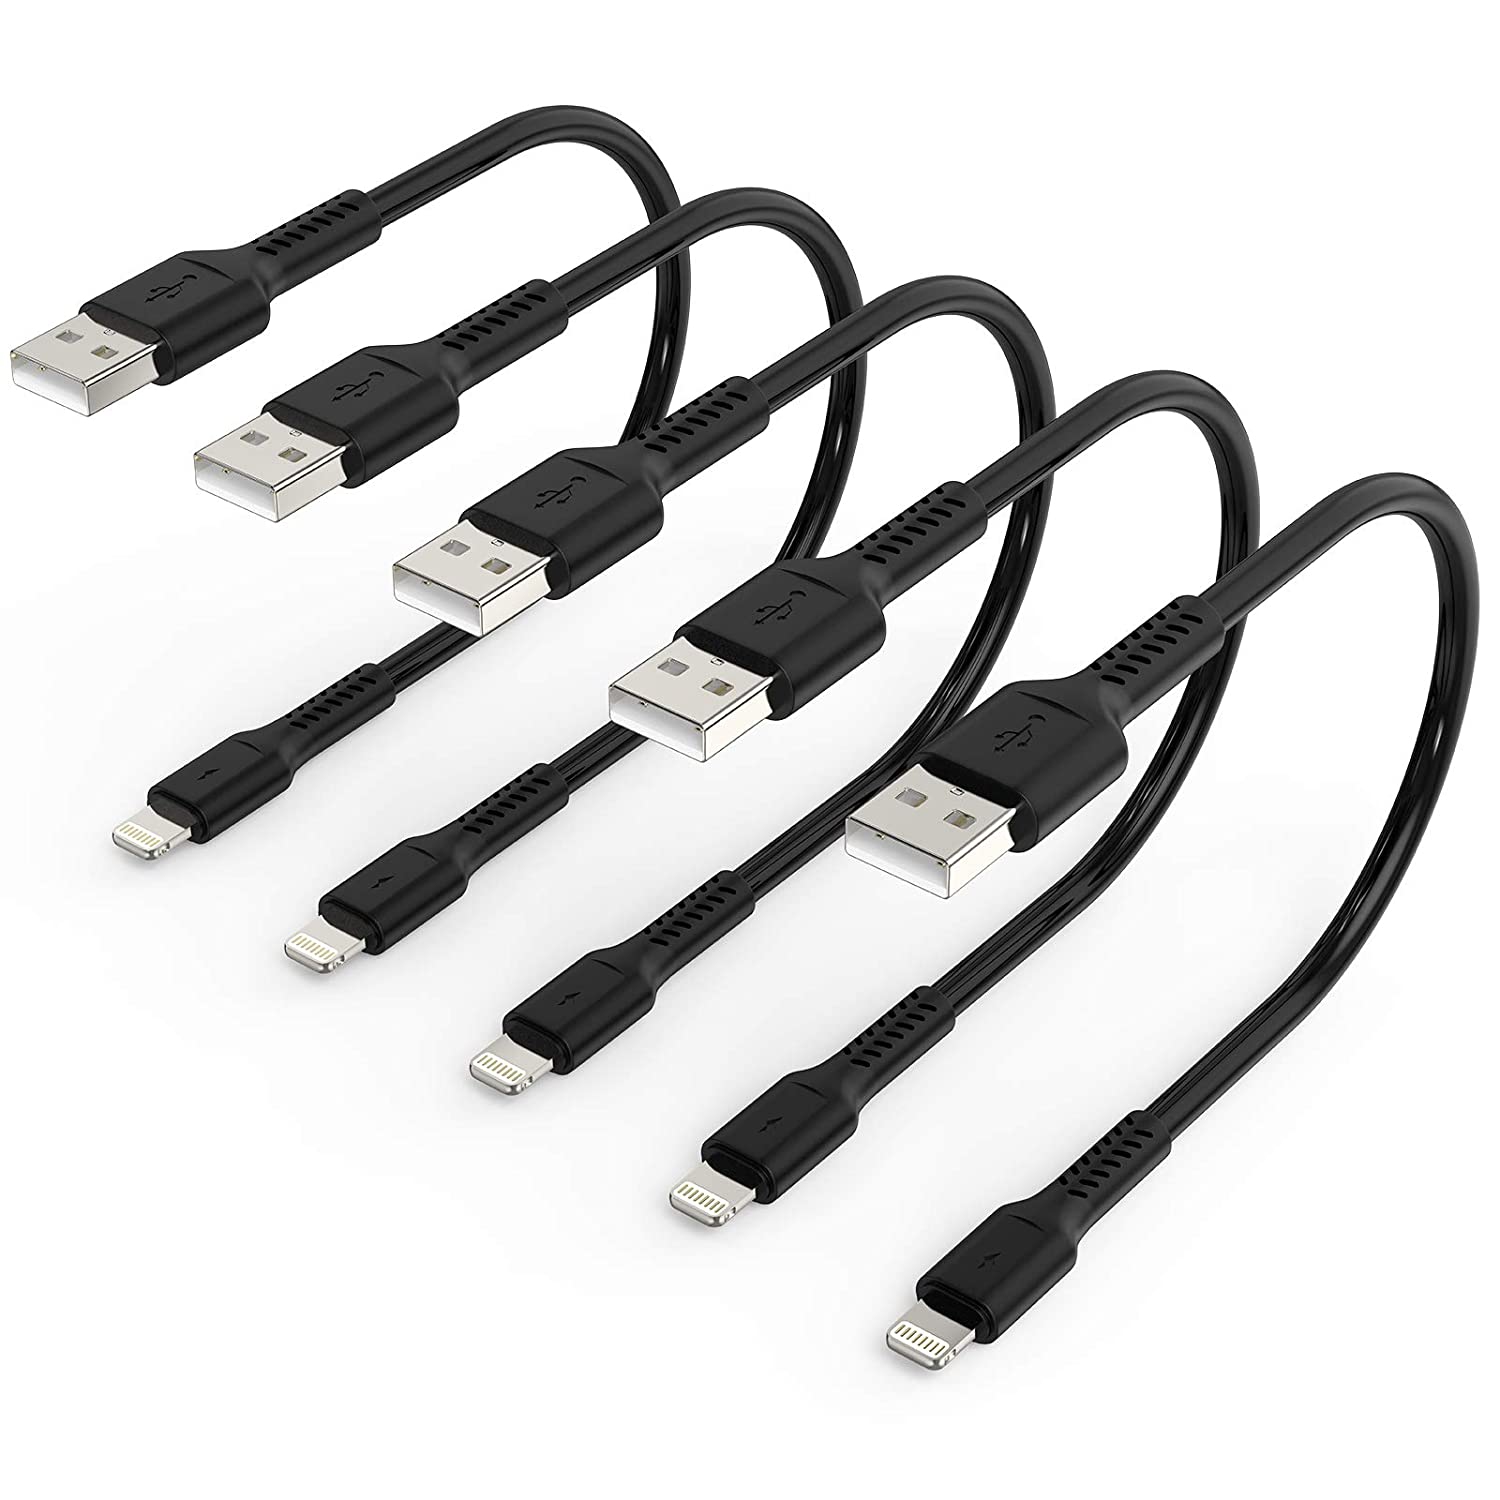 6 inch iPhone Charger Cable Short, 5Pack USB to Lightning Cord Compatible with Apple iPhone 13 12 11 Pro Max Xs Xr X 8 7 6 Plus 5 SE, iPad Air/Mini, Charging Stations